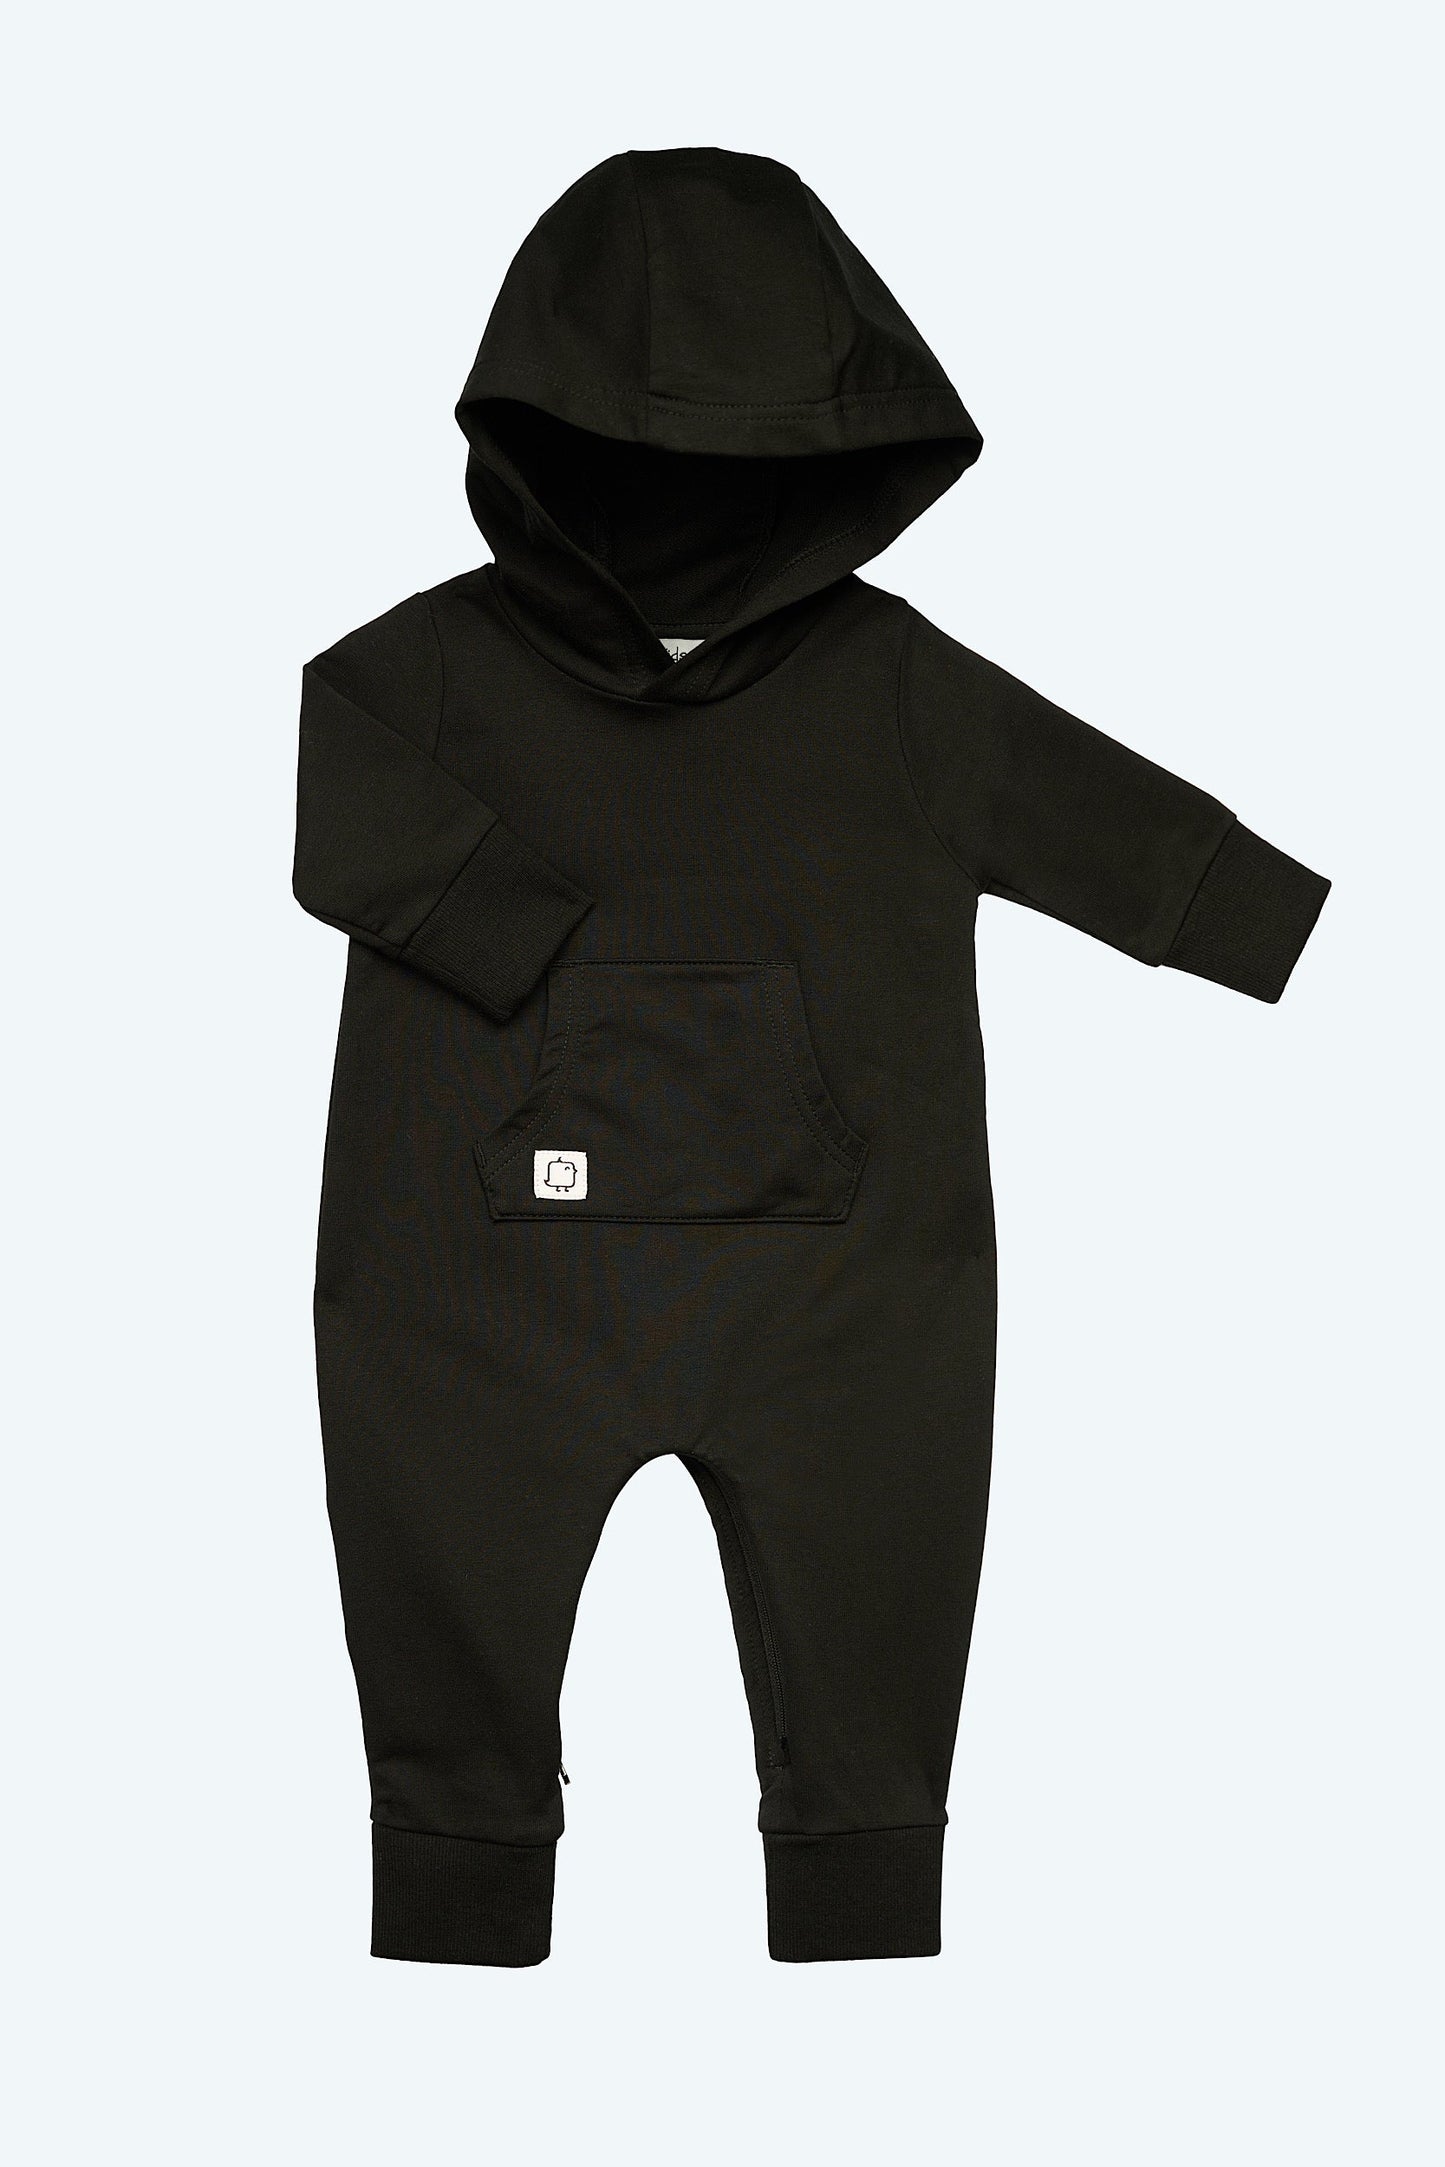 Hooded Romper - Black - HuRo Kids Clothing, Huro Kids, Hooded Zipper Romper, Baby clothes, best baby clothes, best baby clothes canada, zipper romper, baby clothes made in canada, favorite baby clothes, my favorite baby clothes, stylish baby clothes, baby clothes online, 